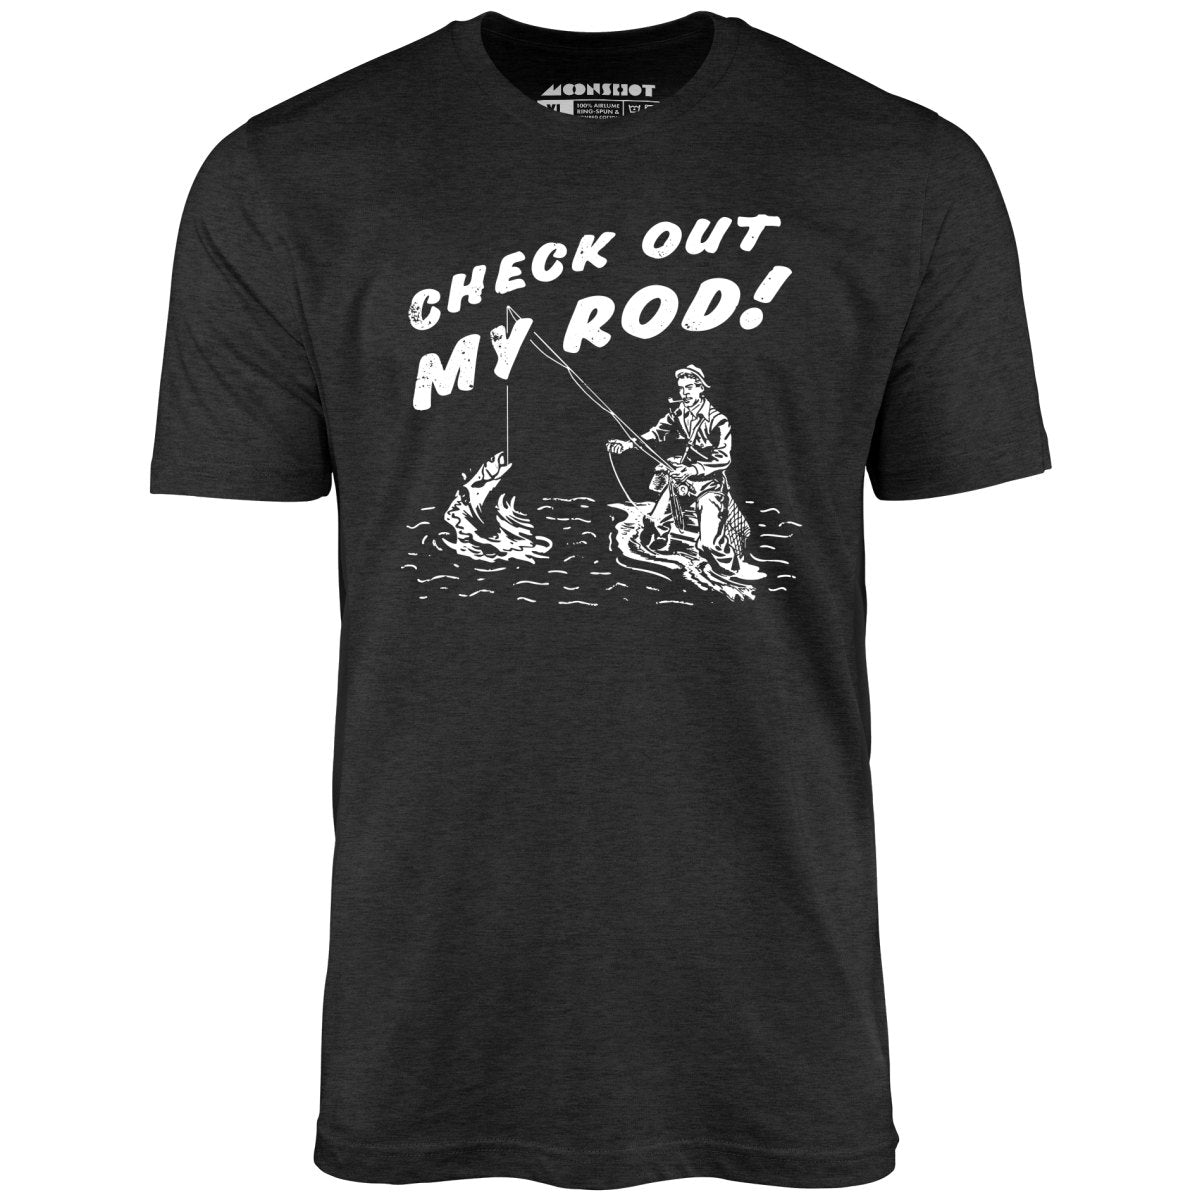 Check Out My Rod - Unisex T-Shirt